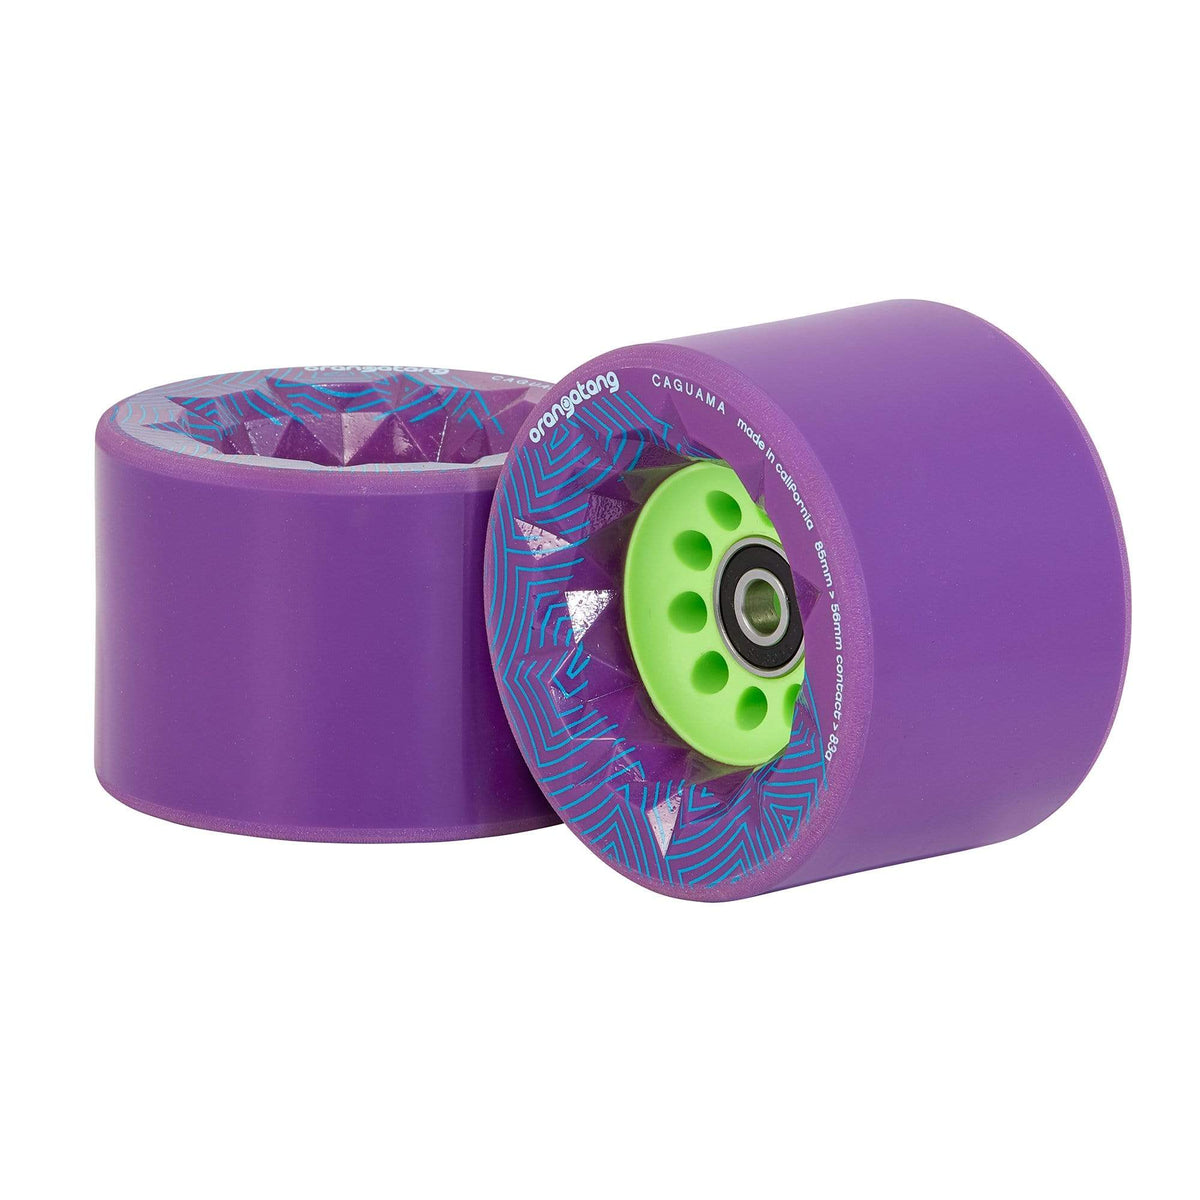 Boosted Loaded Caguama 85mm 83a, W / Pulleys - Purple